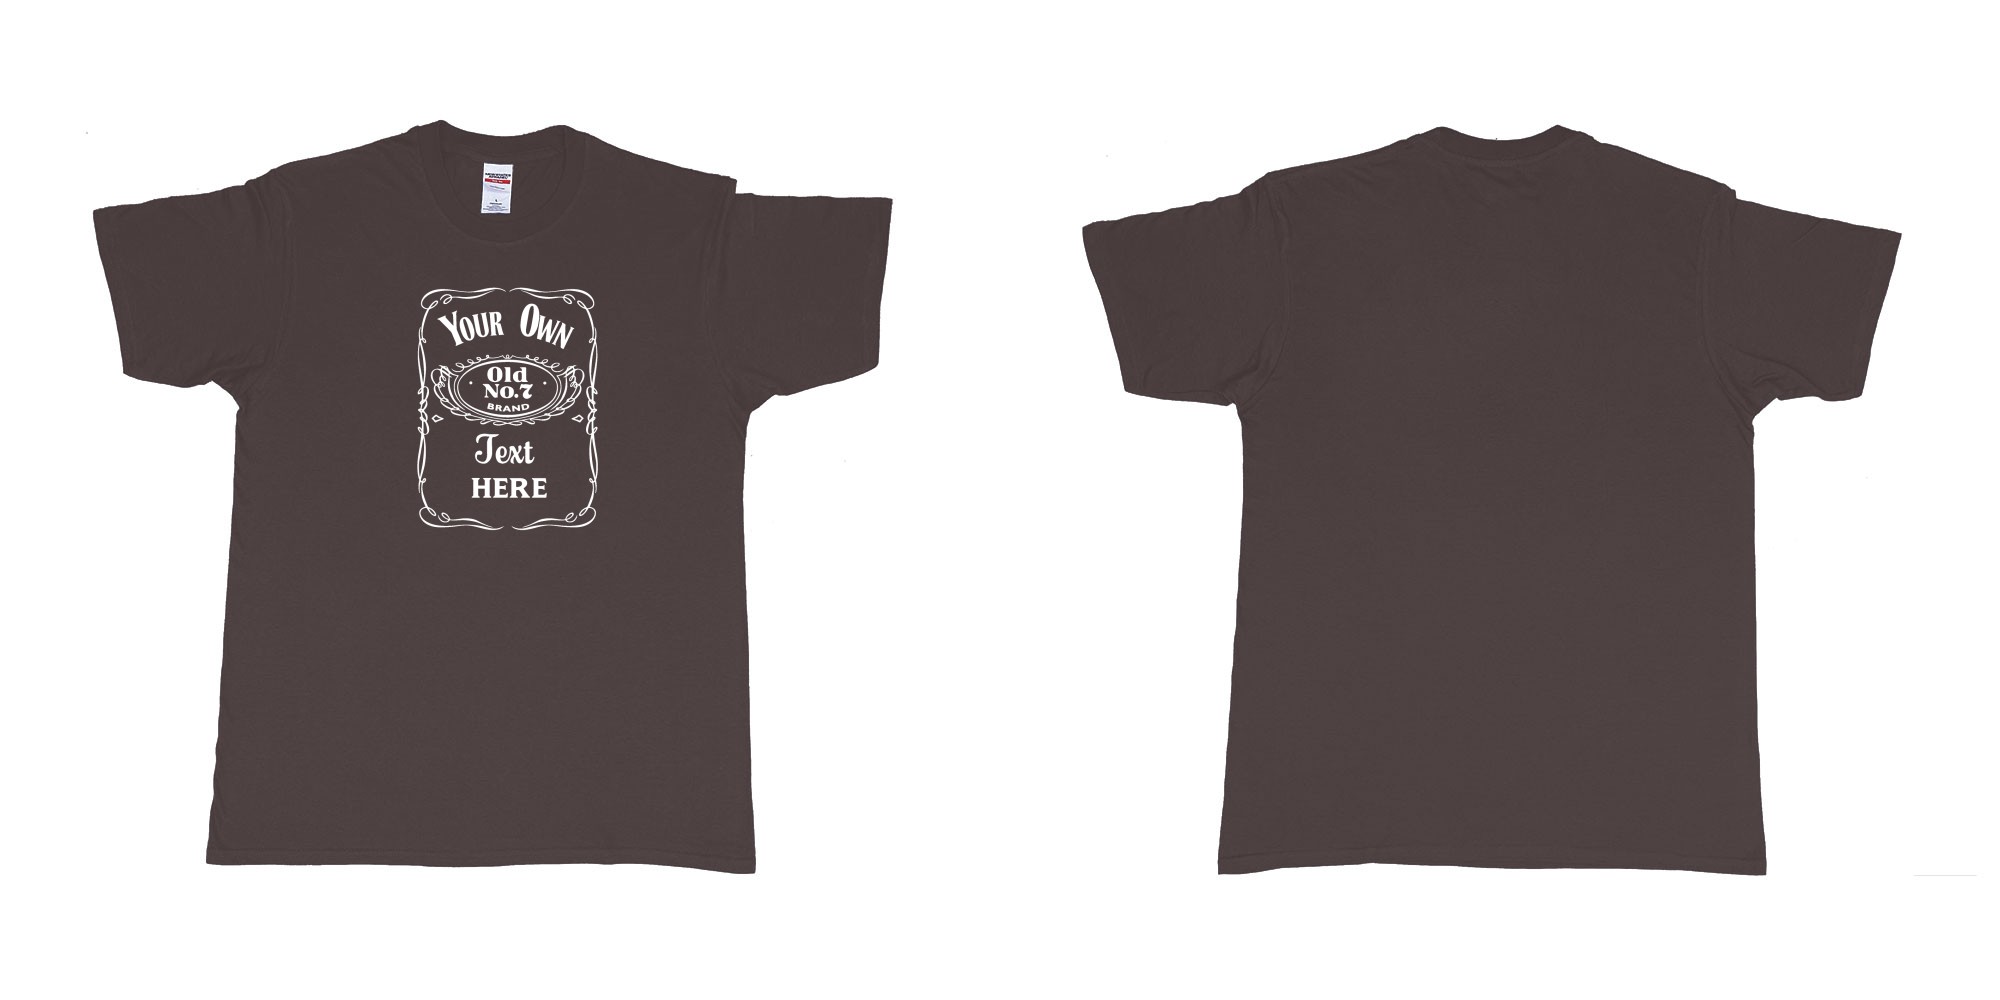 Custom tshirt design Jack Daniels Label in fabric color dark-chocolate choice your own text made in Bali by The Pirate Way